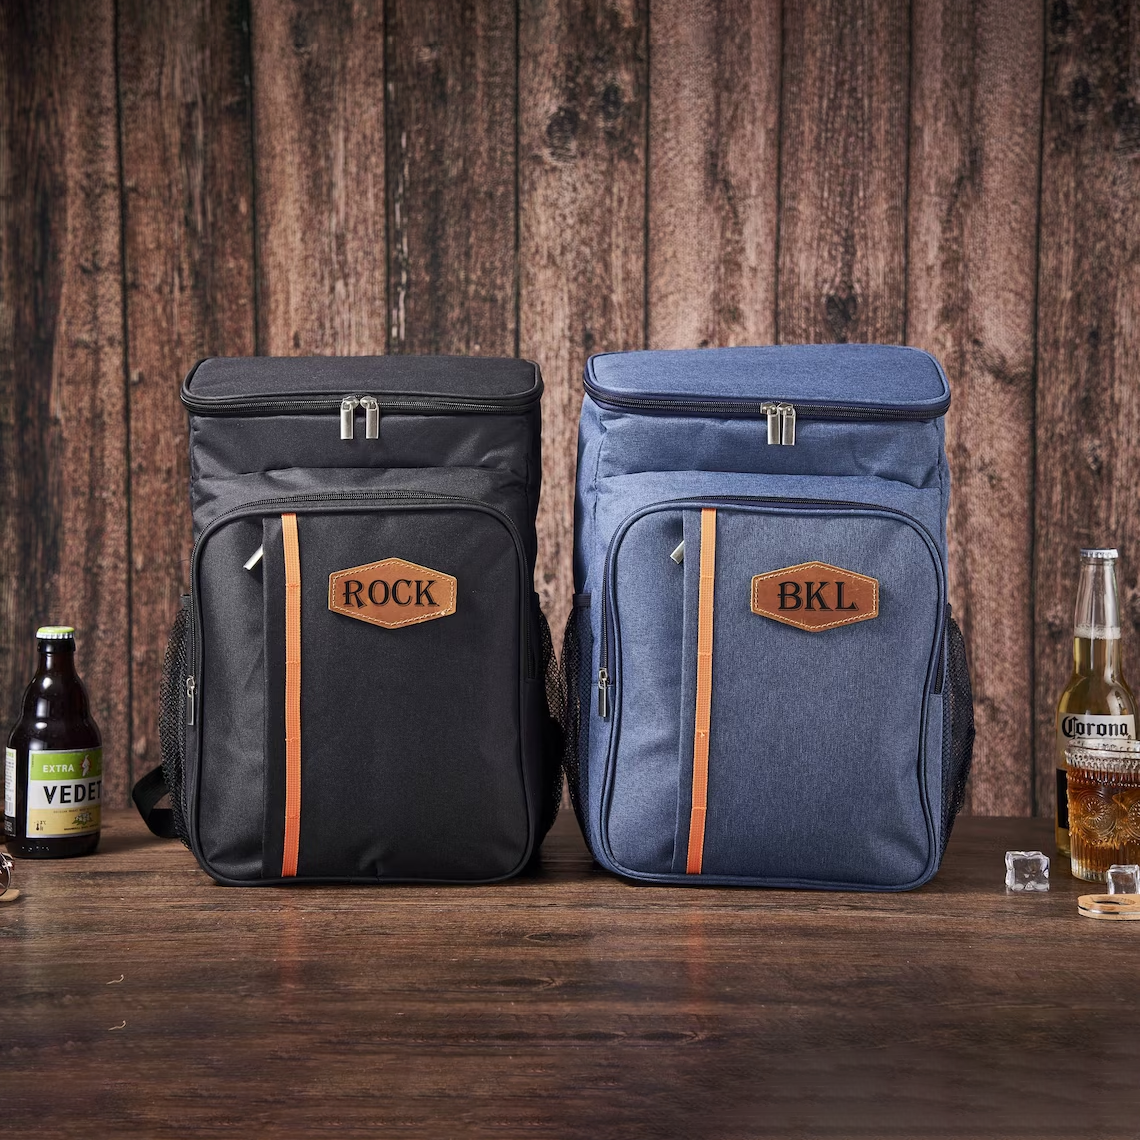 Personalized Groom Gifts, Best Man Gift, Beer Cooler Bag